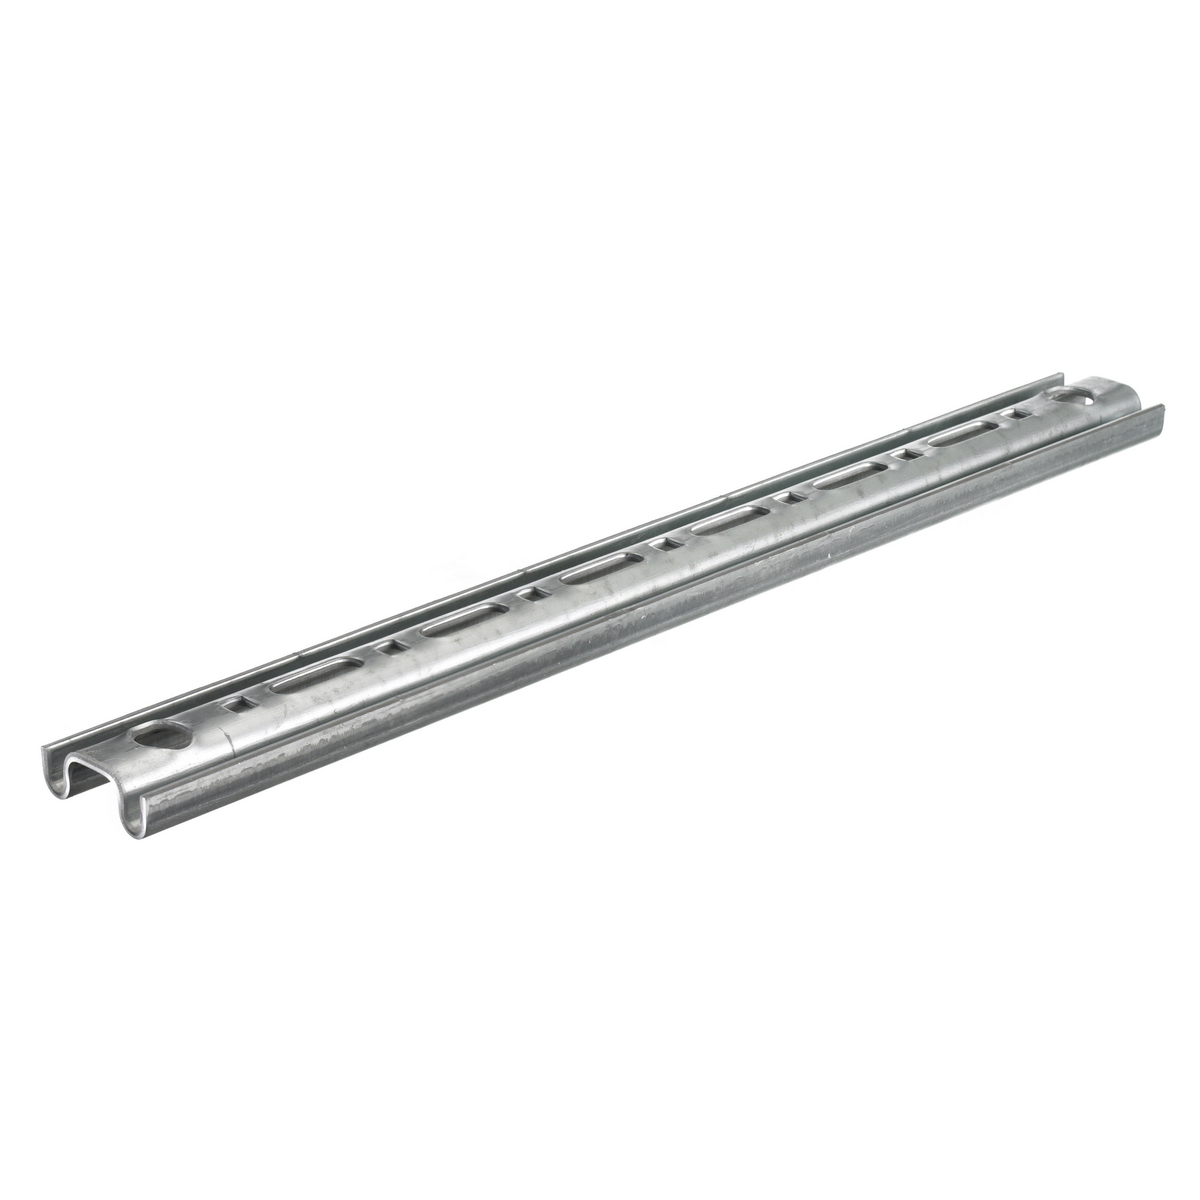 WB,ACCS,CEILINGSUPPORT,20"TRAY,PREGALV